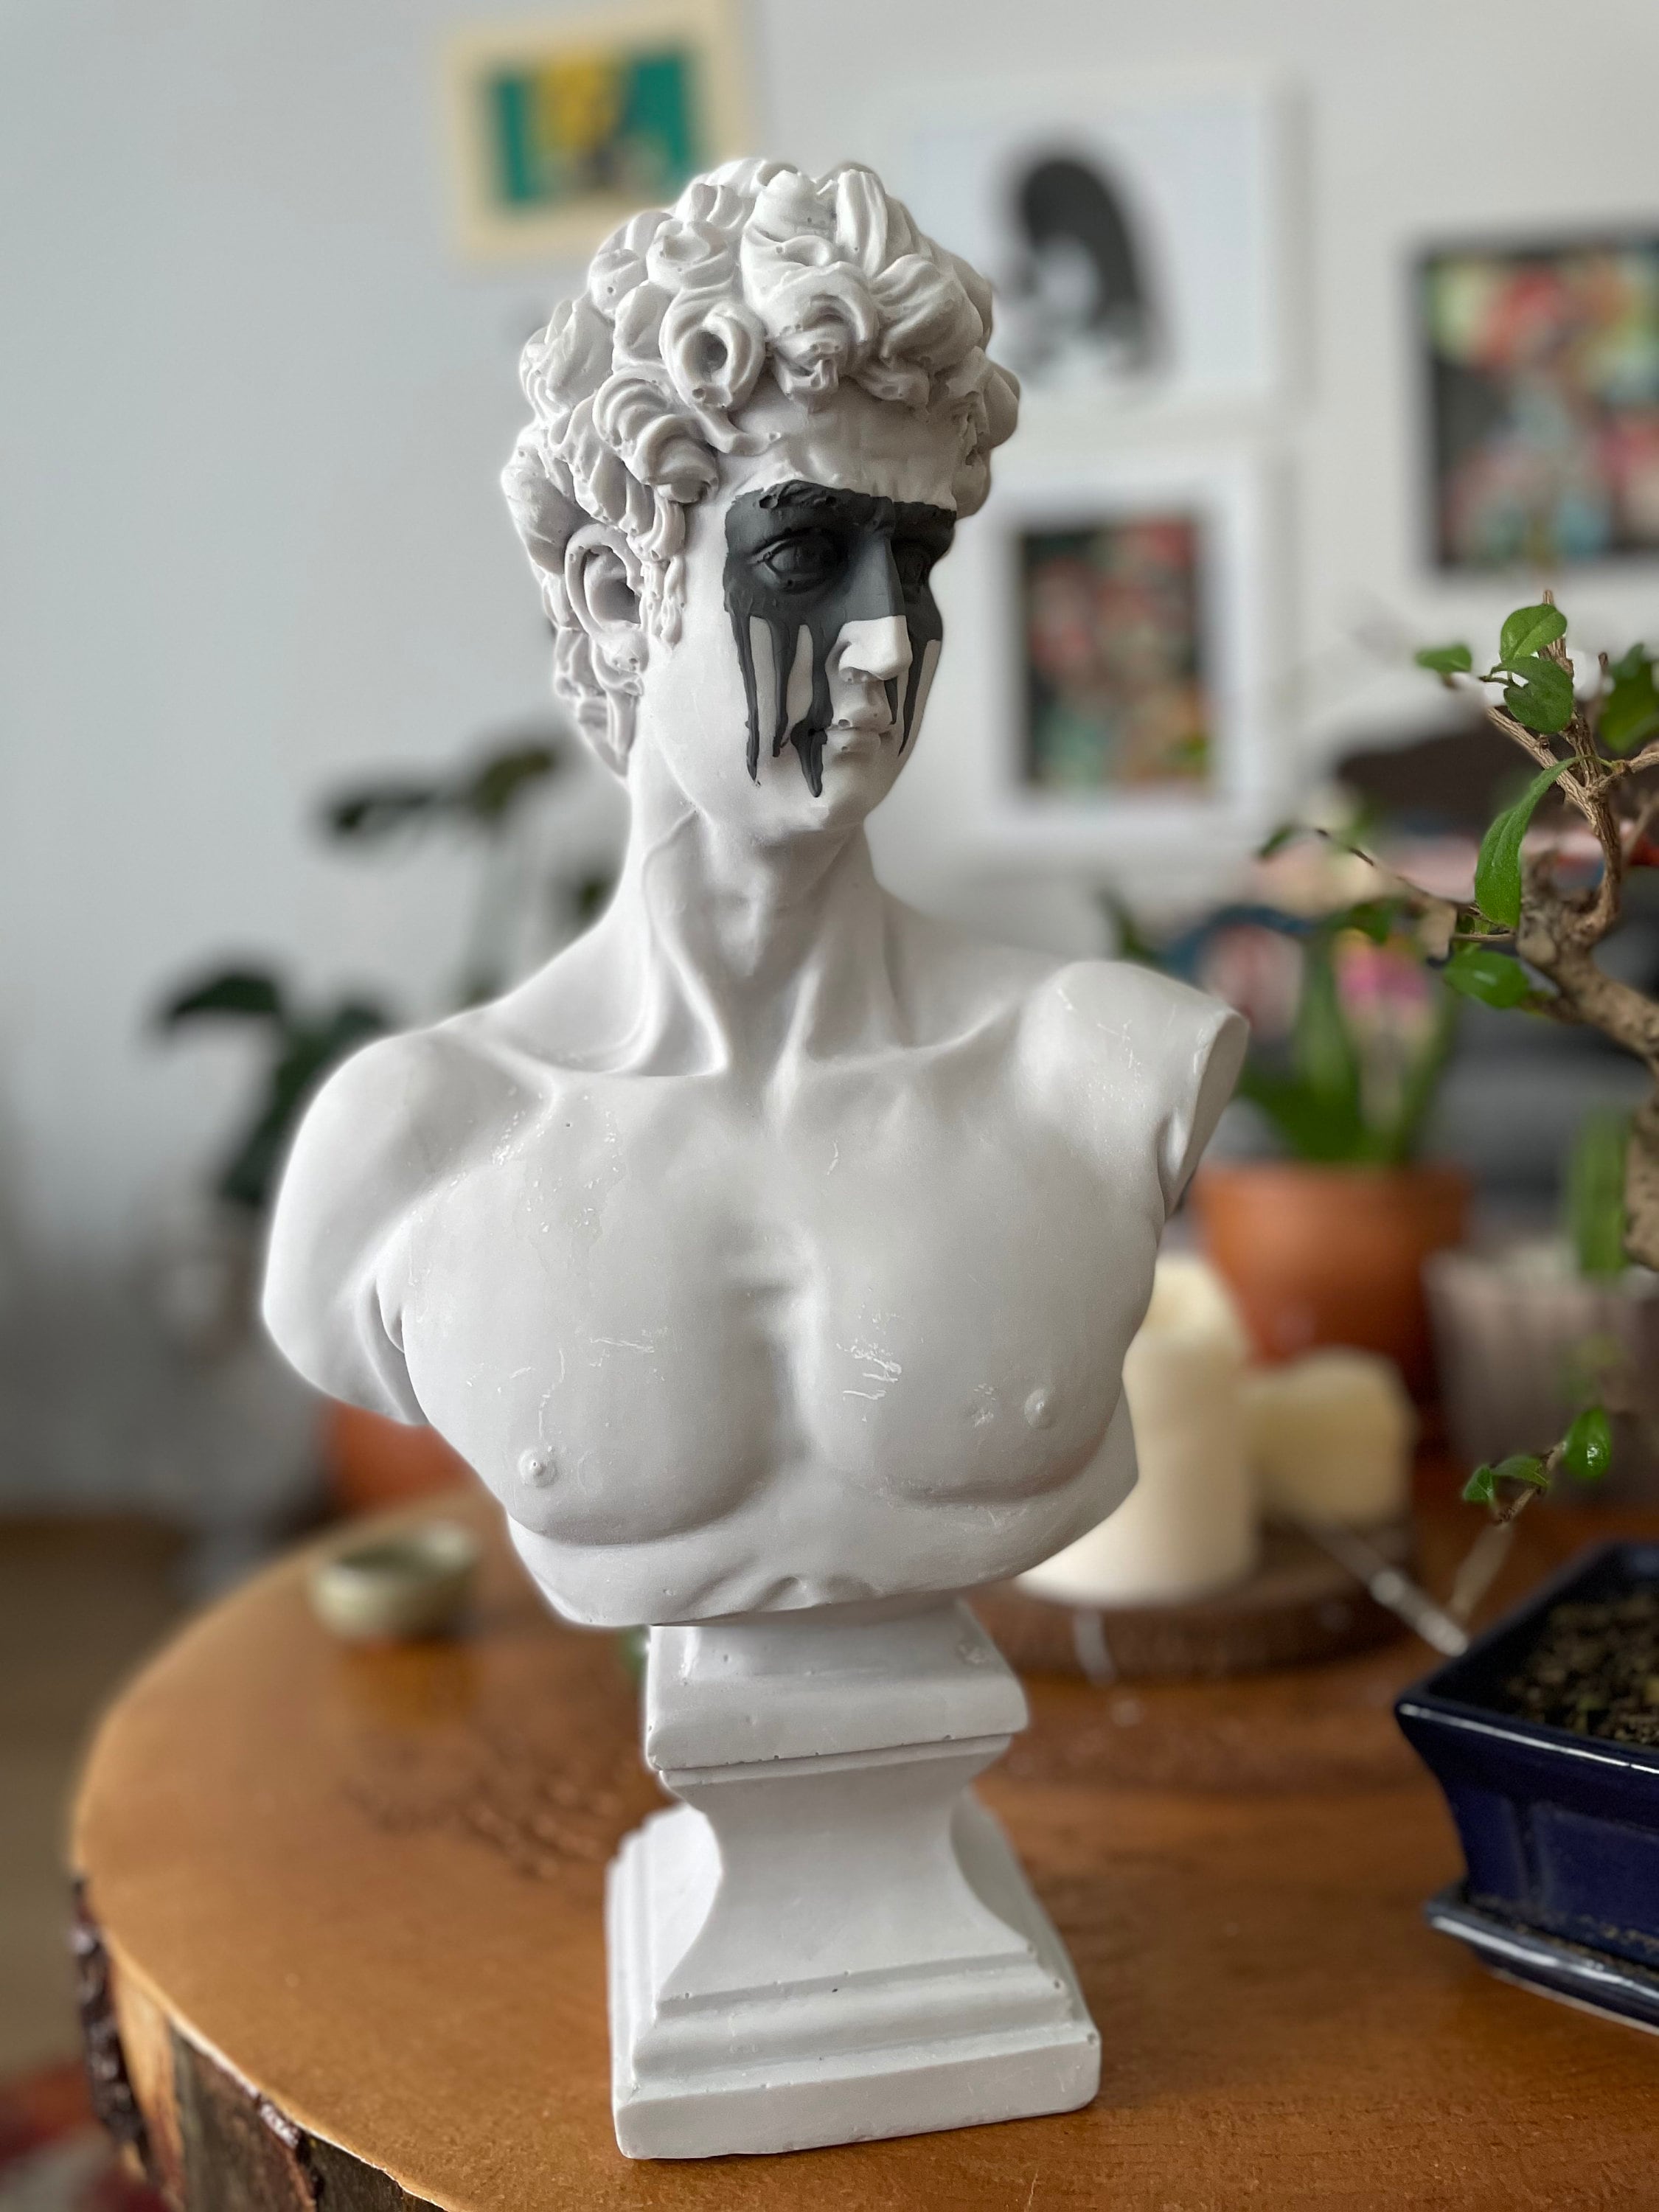 Timeless Serenity: Large David Bust Sculpture with Grey Mask